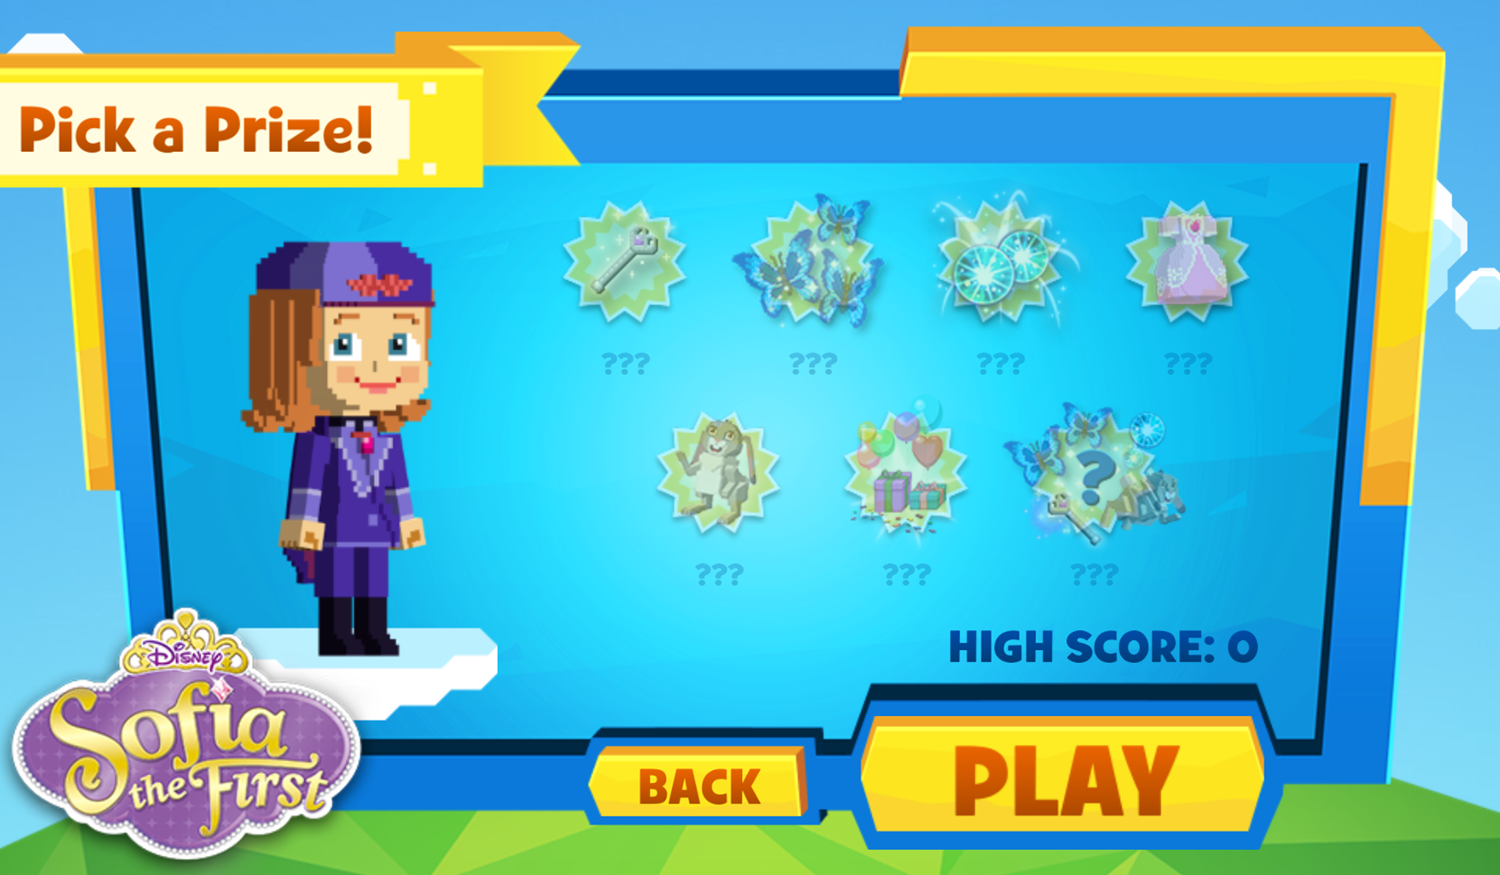 Soaring Over Summer Arcade Game Sofia The First Screenshot.